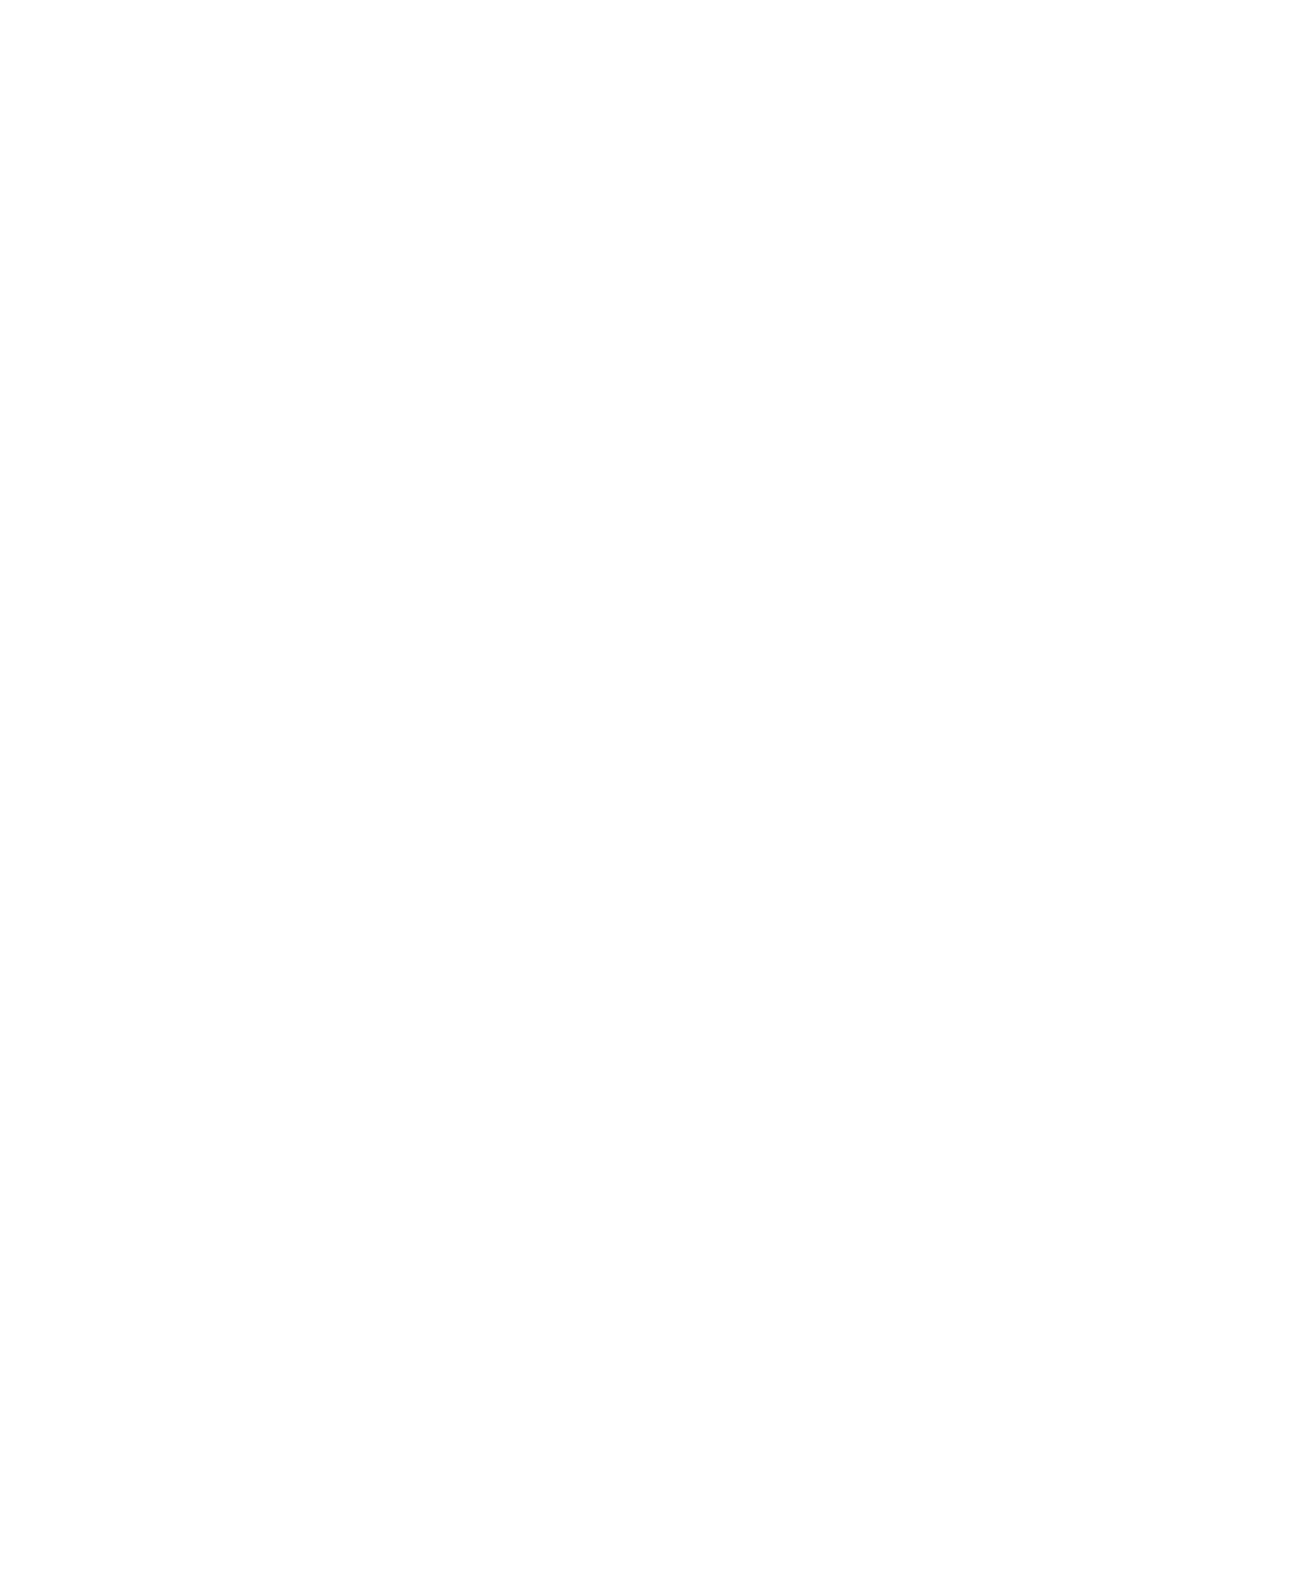 Gujarat Alkalies and Chemicals logo for dark backgrounds (transparent PNG)